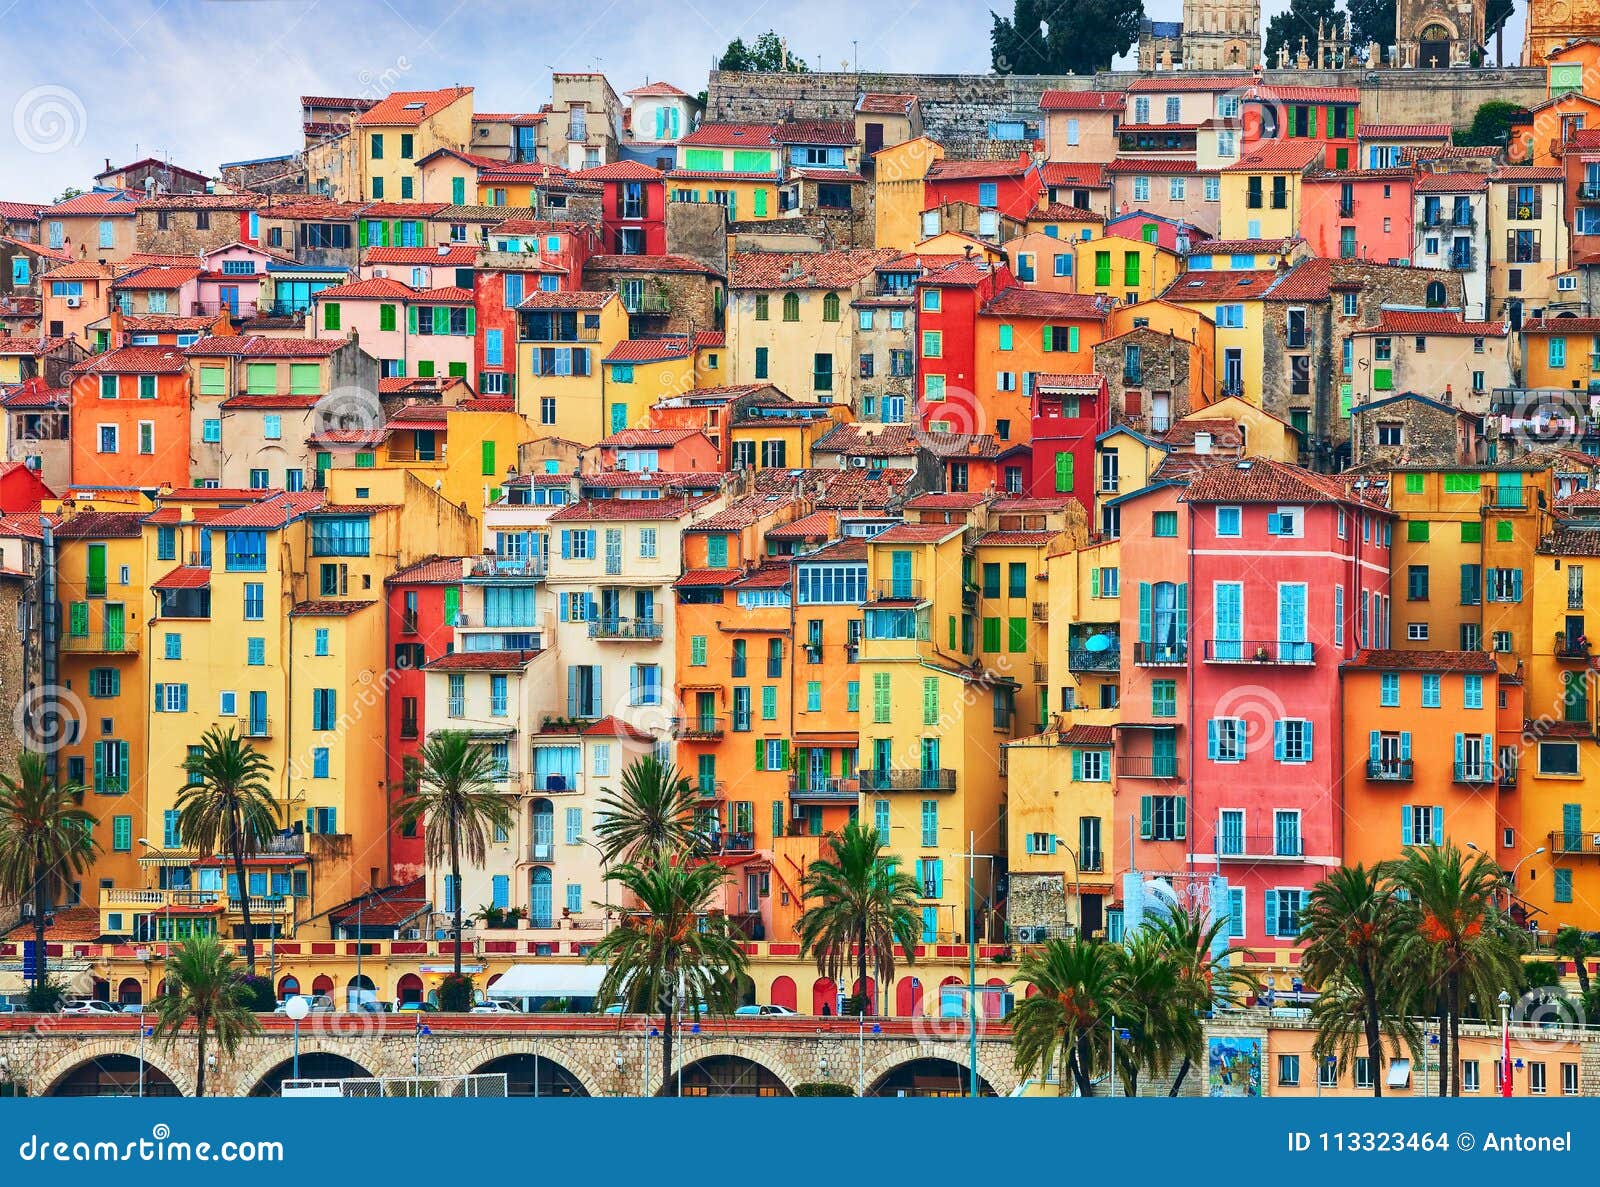 colorful houses in old part of menton, french riviera, france